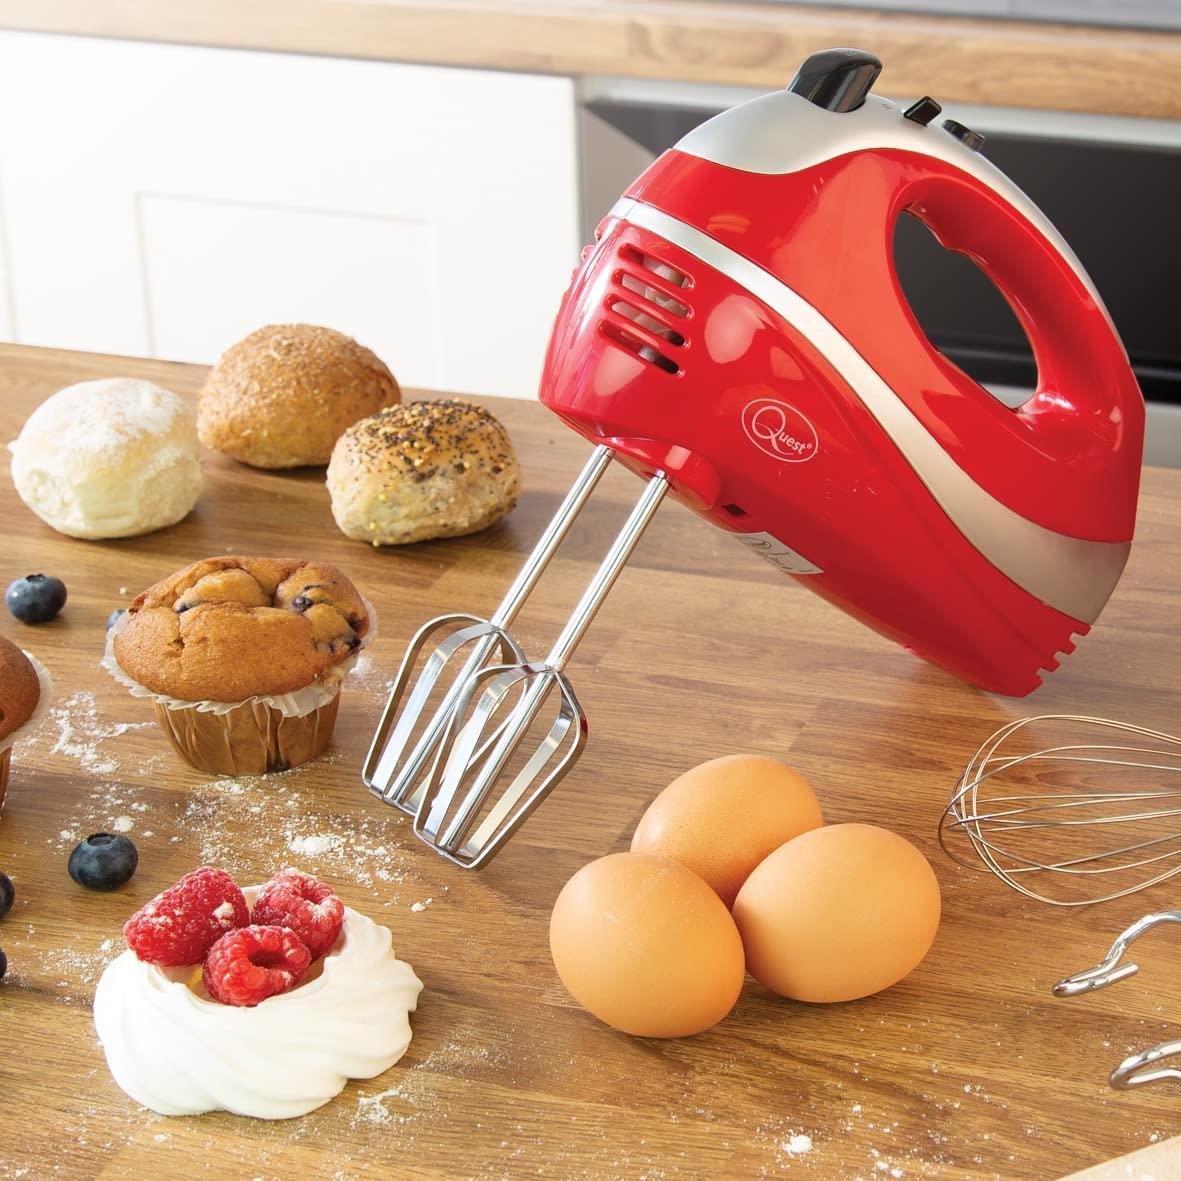 Quest Professional Hand Mixer - Red/Silver (Carton of 8)